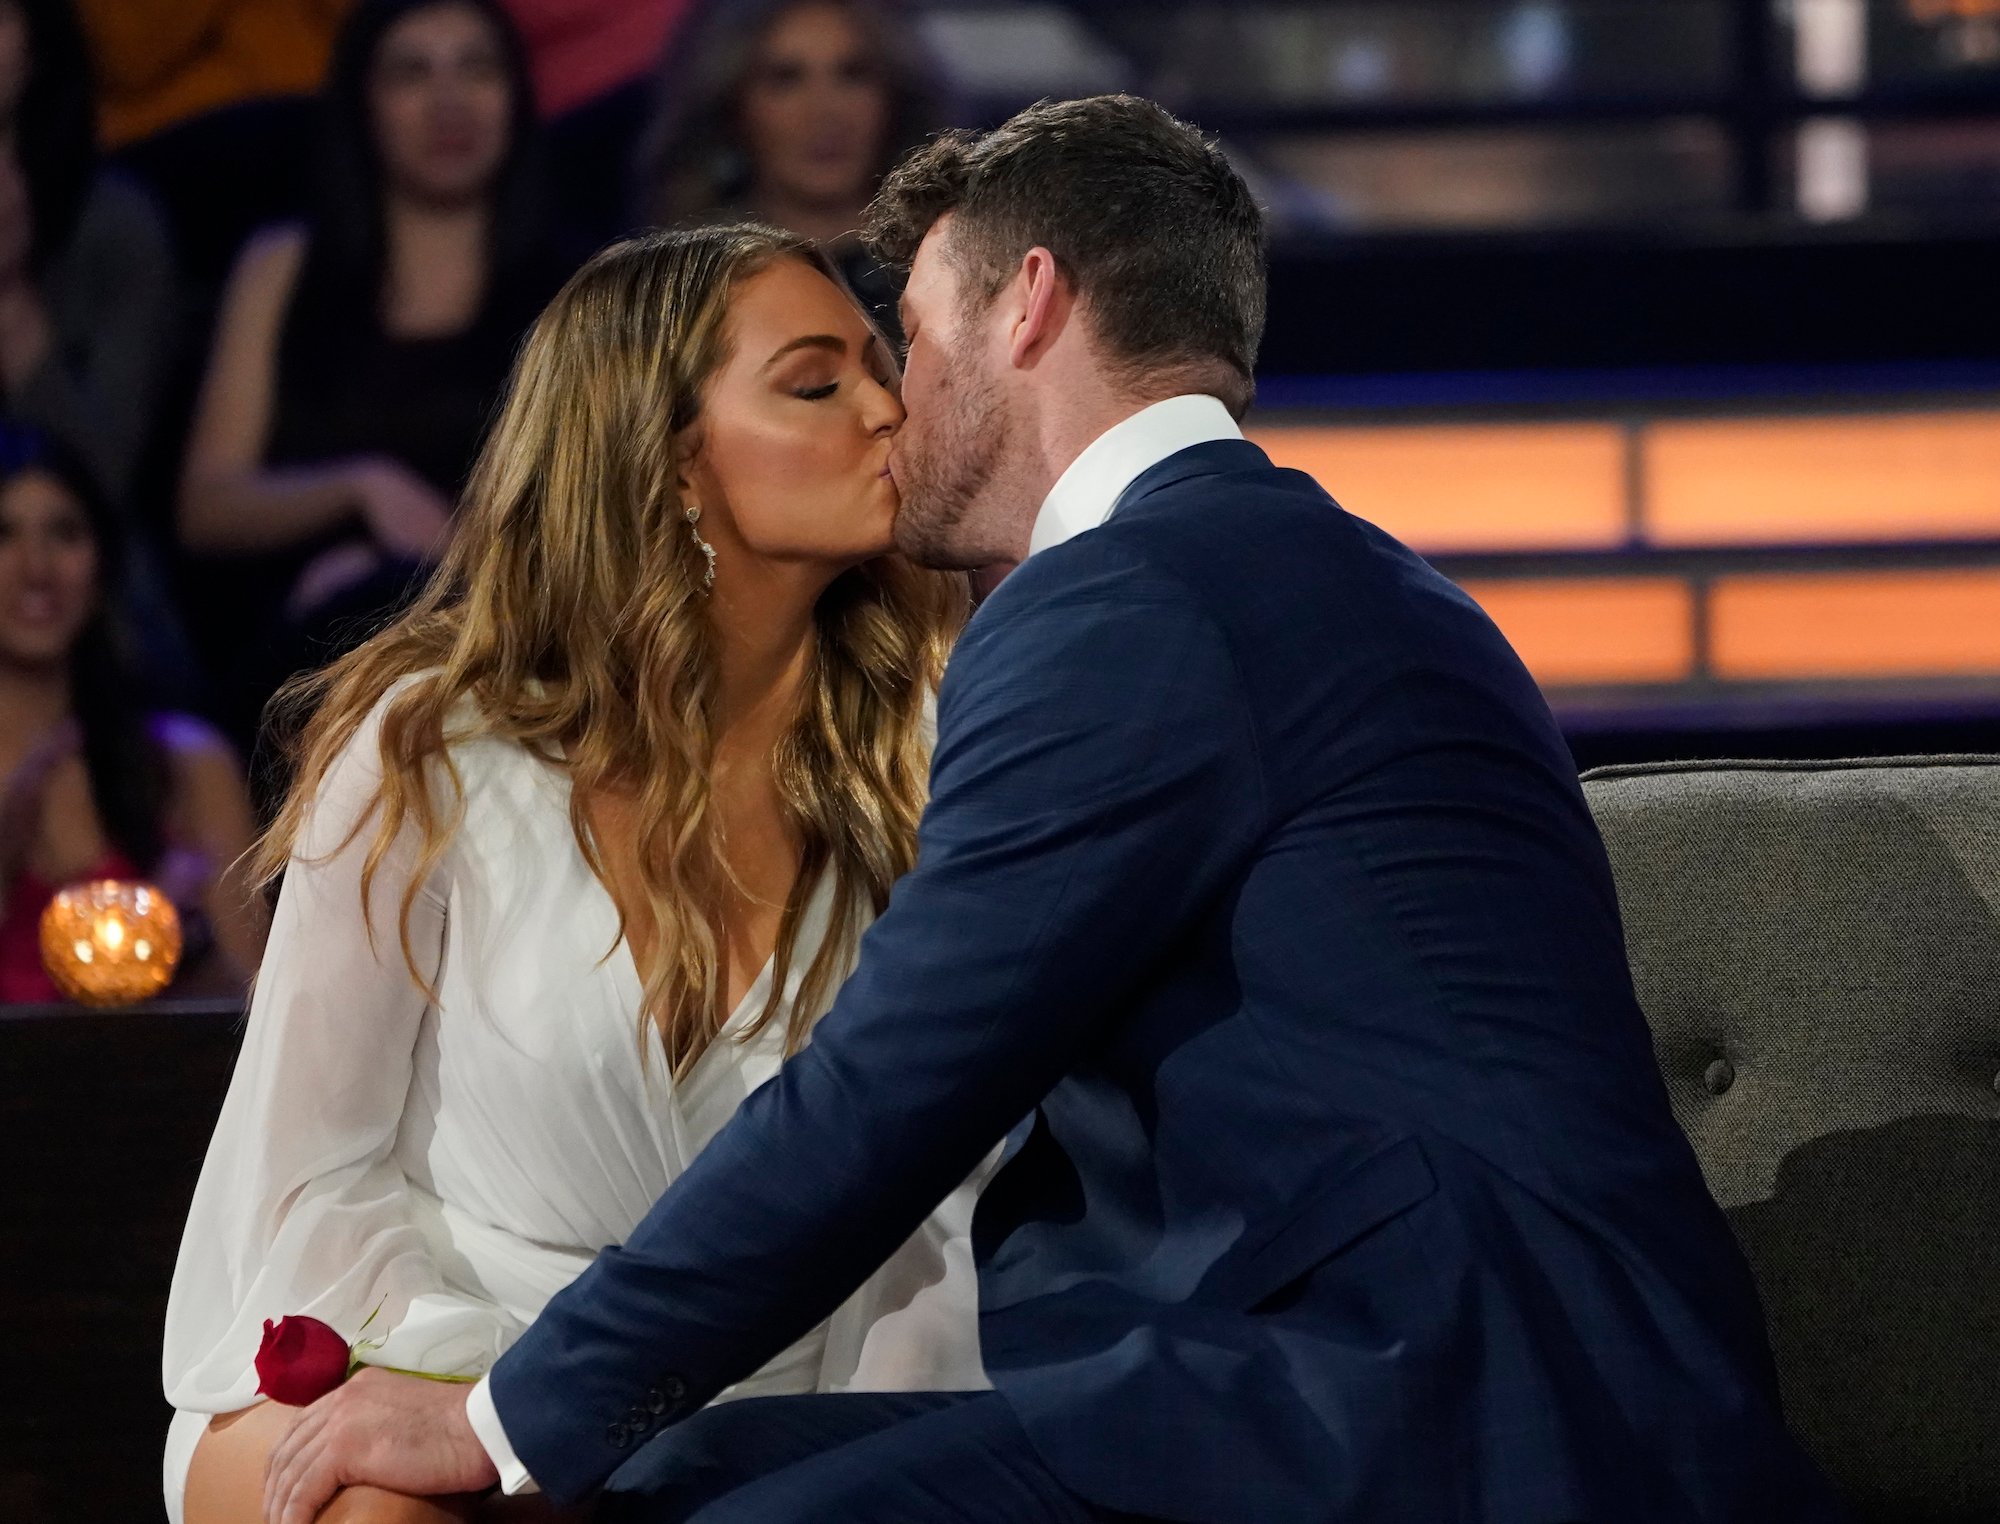 'The Bachelor' couple Susie Evans and Clayton Echard kiss on stage during the finale.